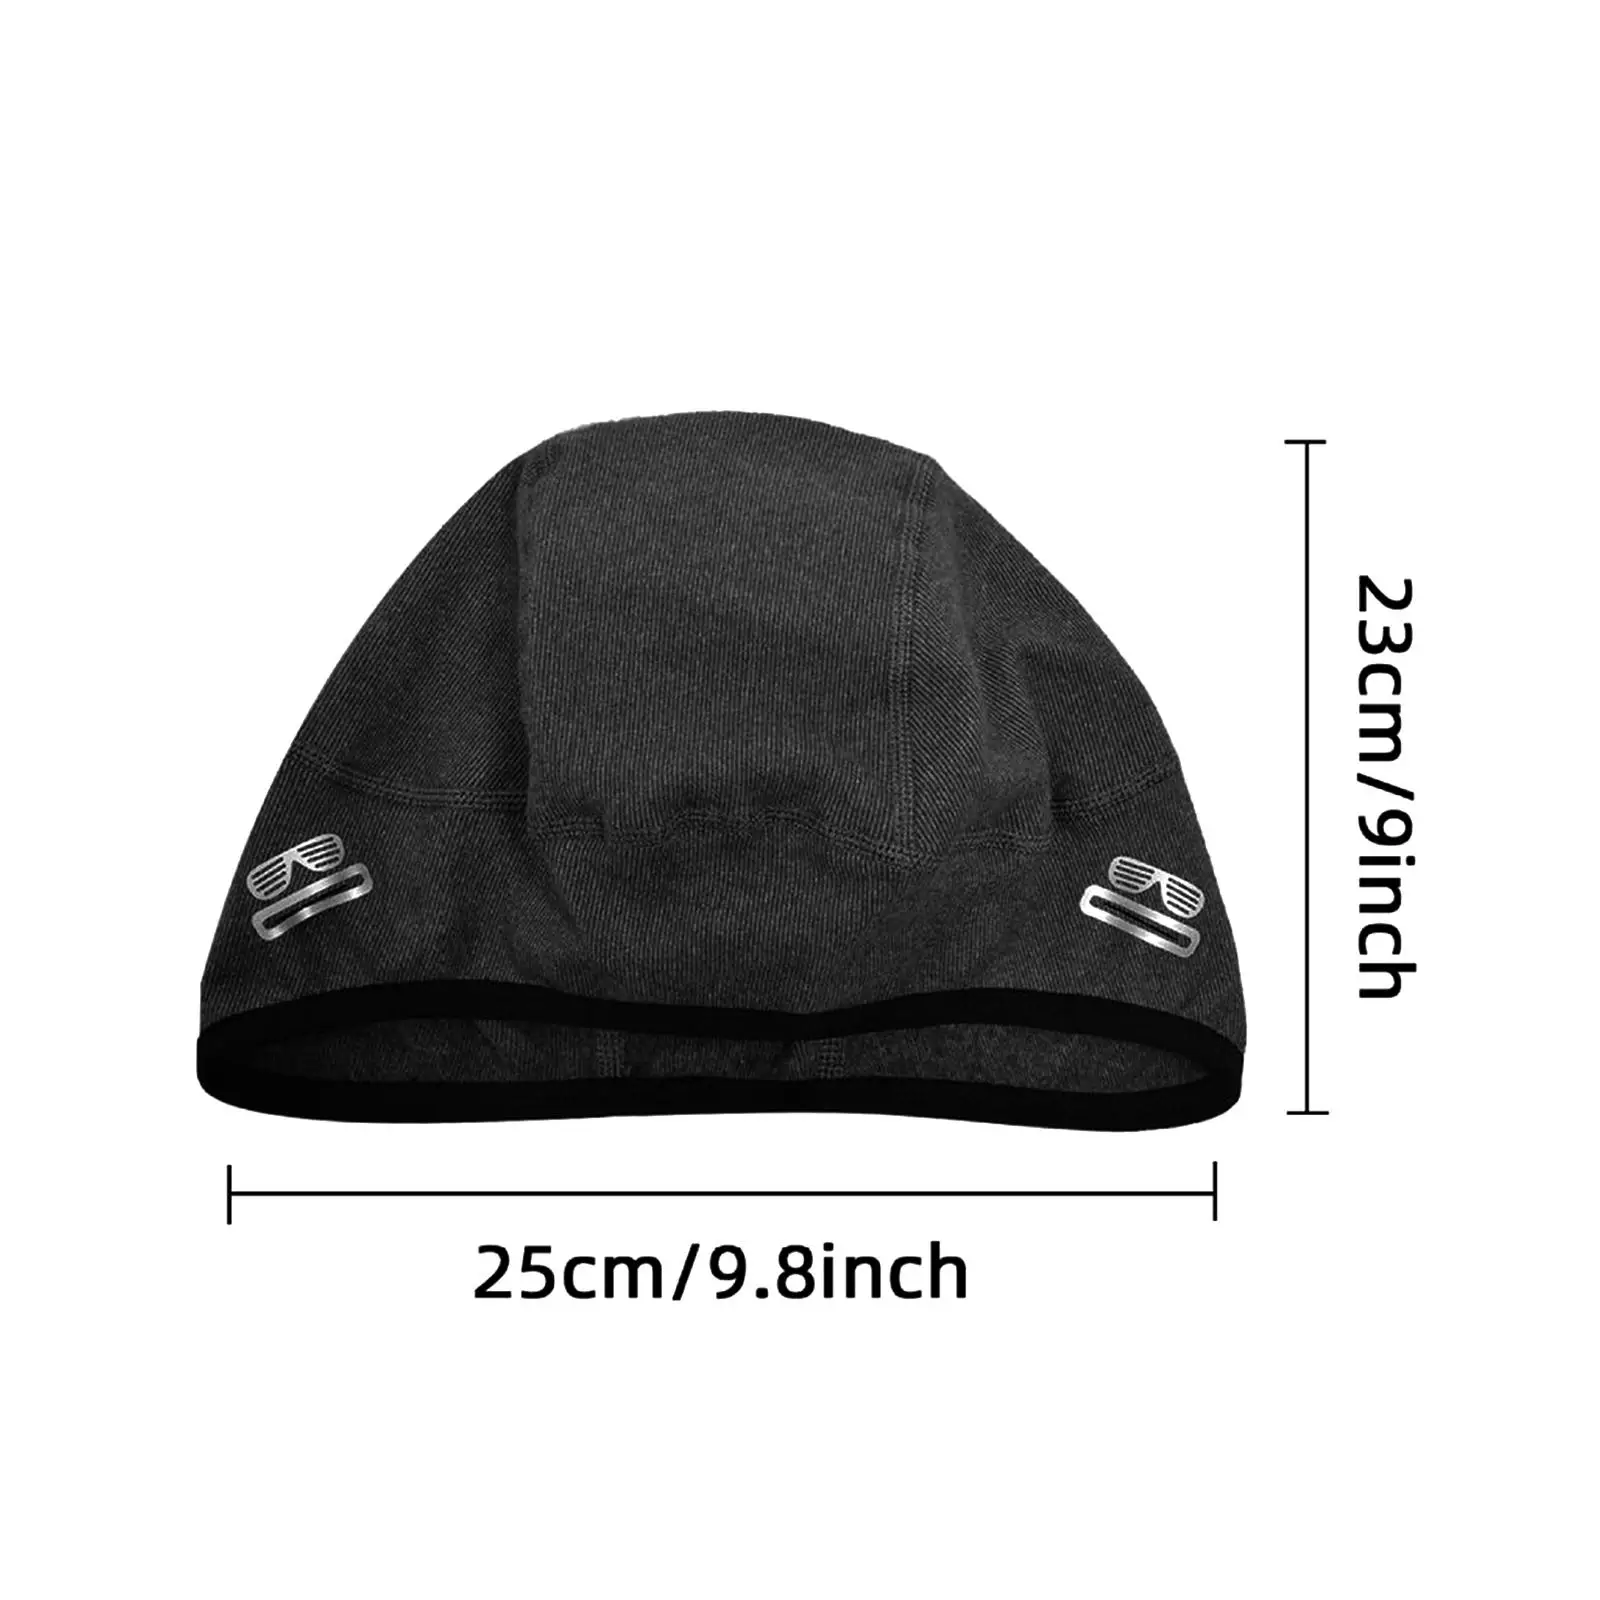 Skull Cap Helmet Liner Stretch for Men with Ear Cover Winter Warm Hat for Riding Motorcycle Climbing Cold Weather Outdoor Sports